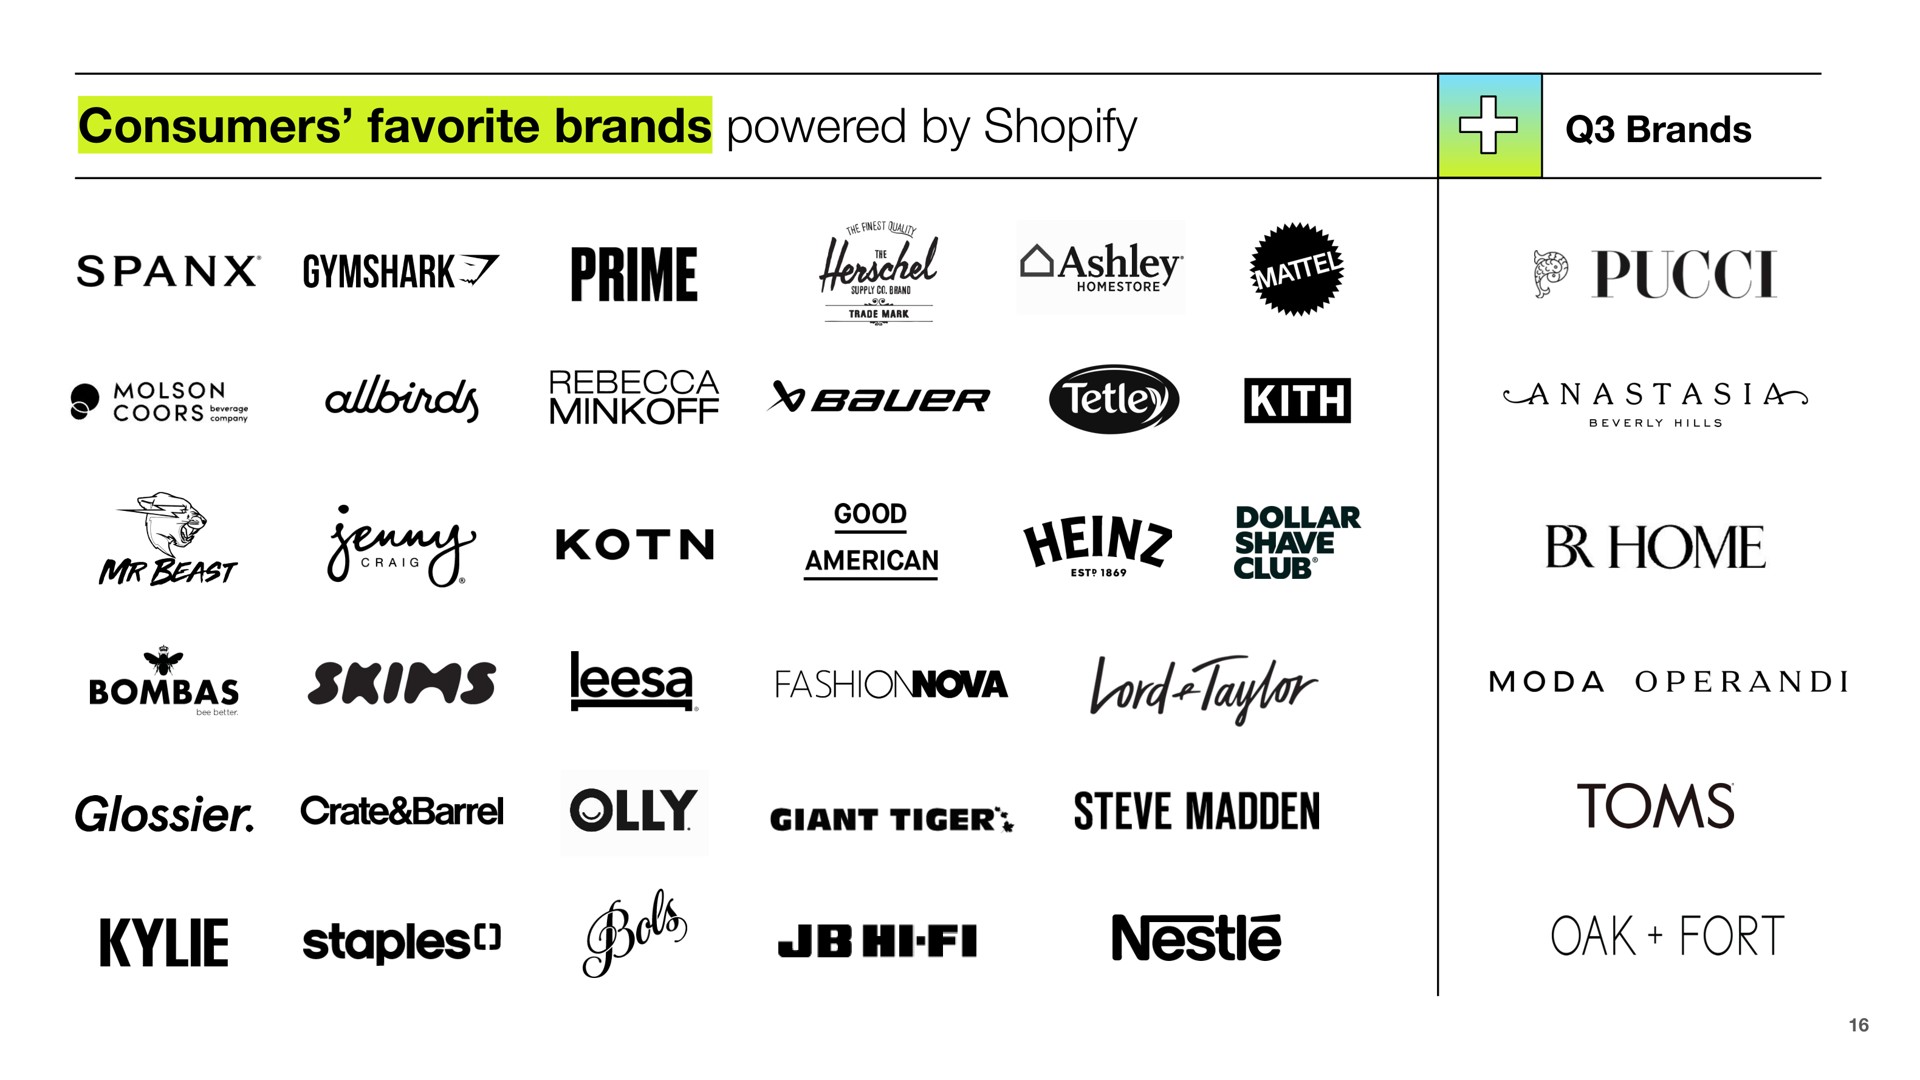 consumers favorite brands powered by brands prime kith home skip crate ticer madden staples go nestle oak fort | Shopify